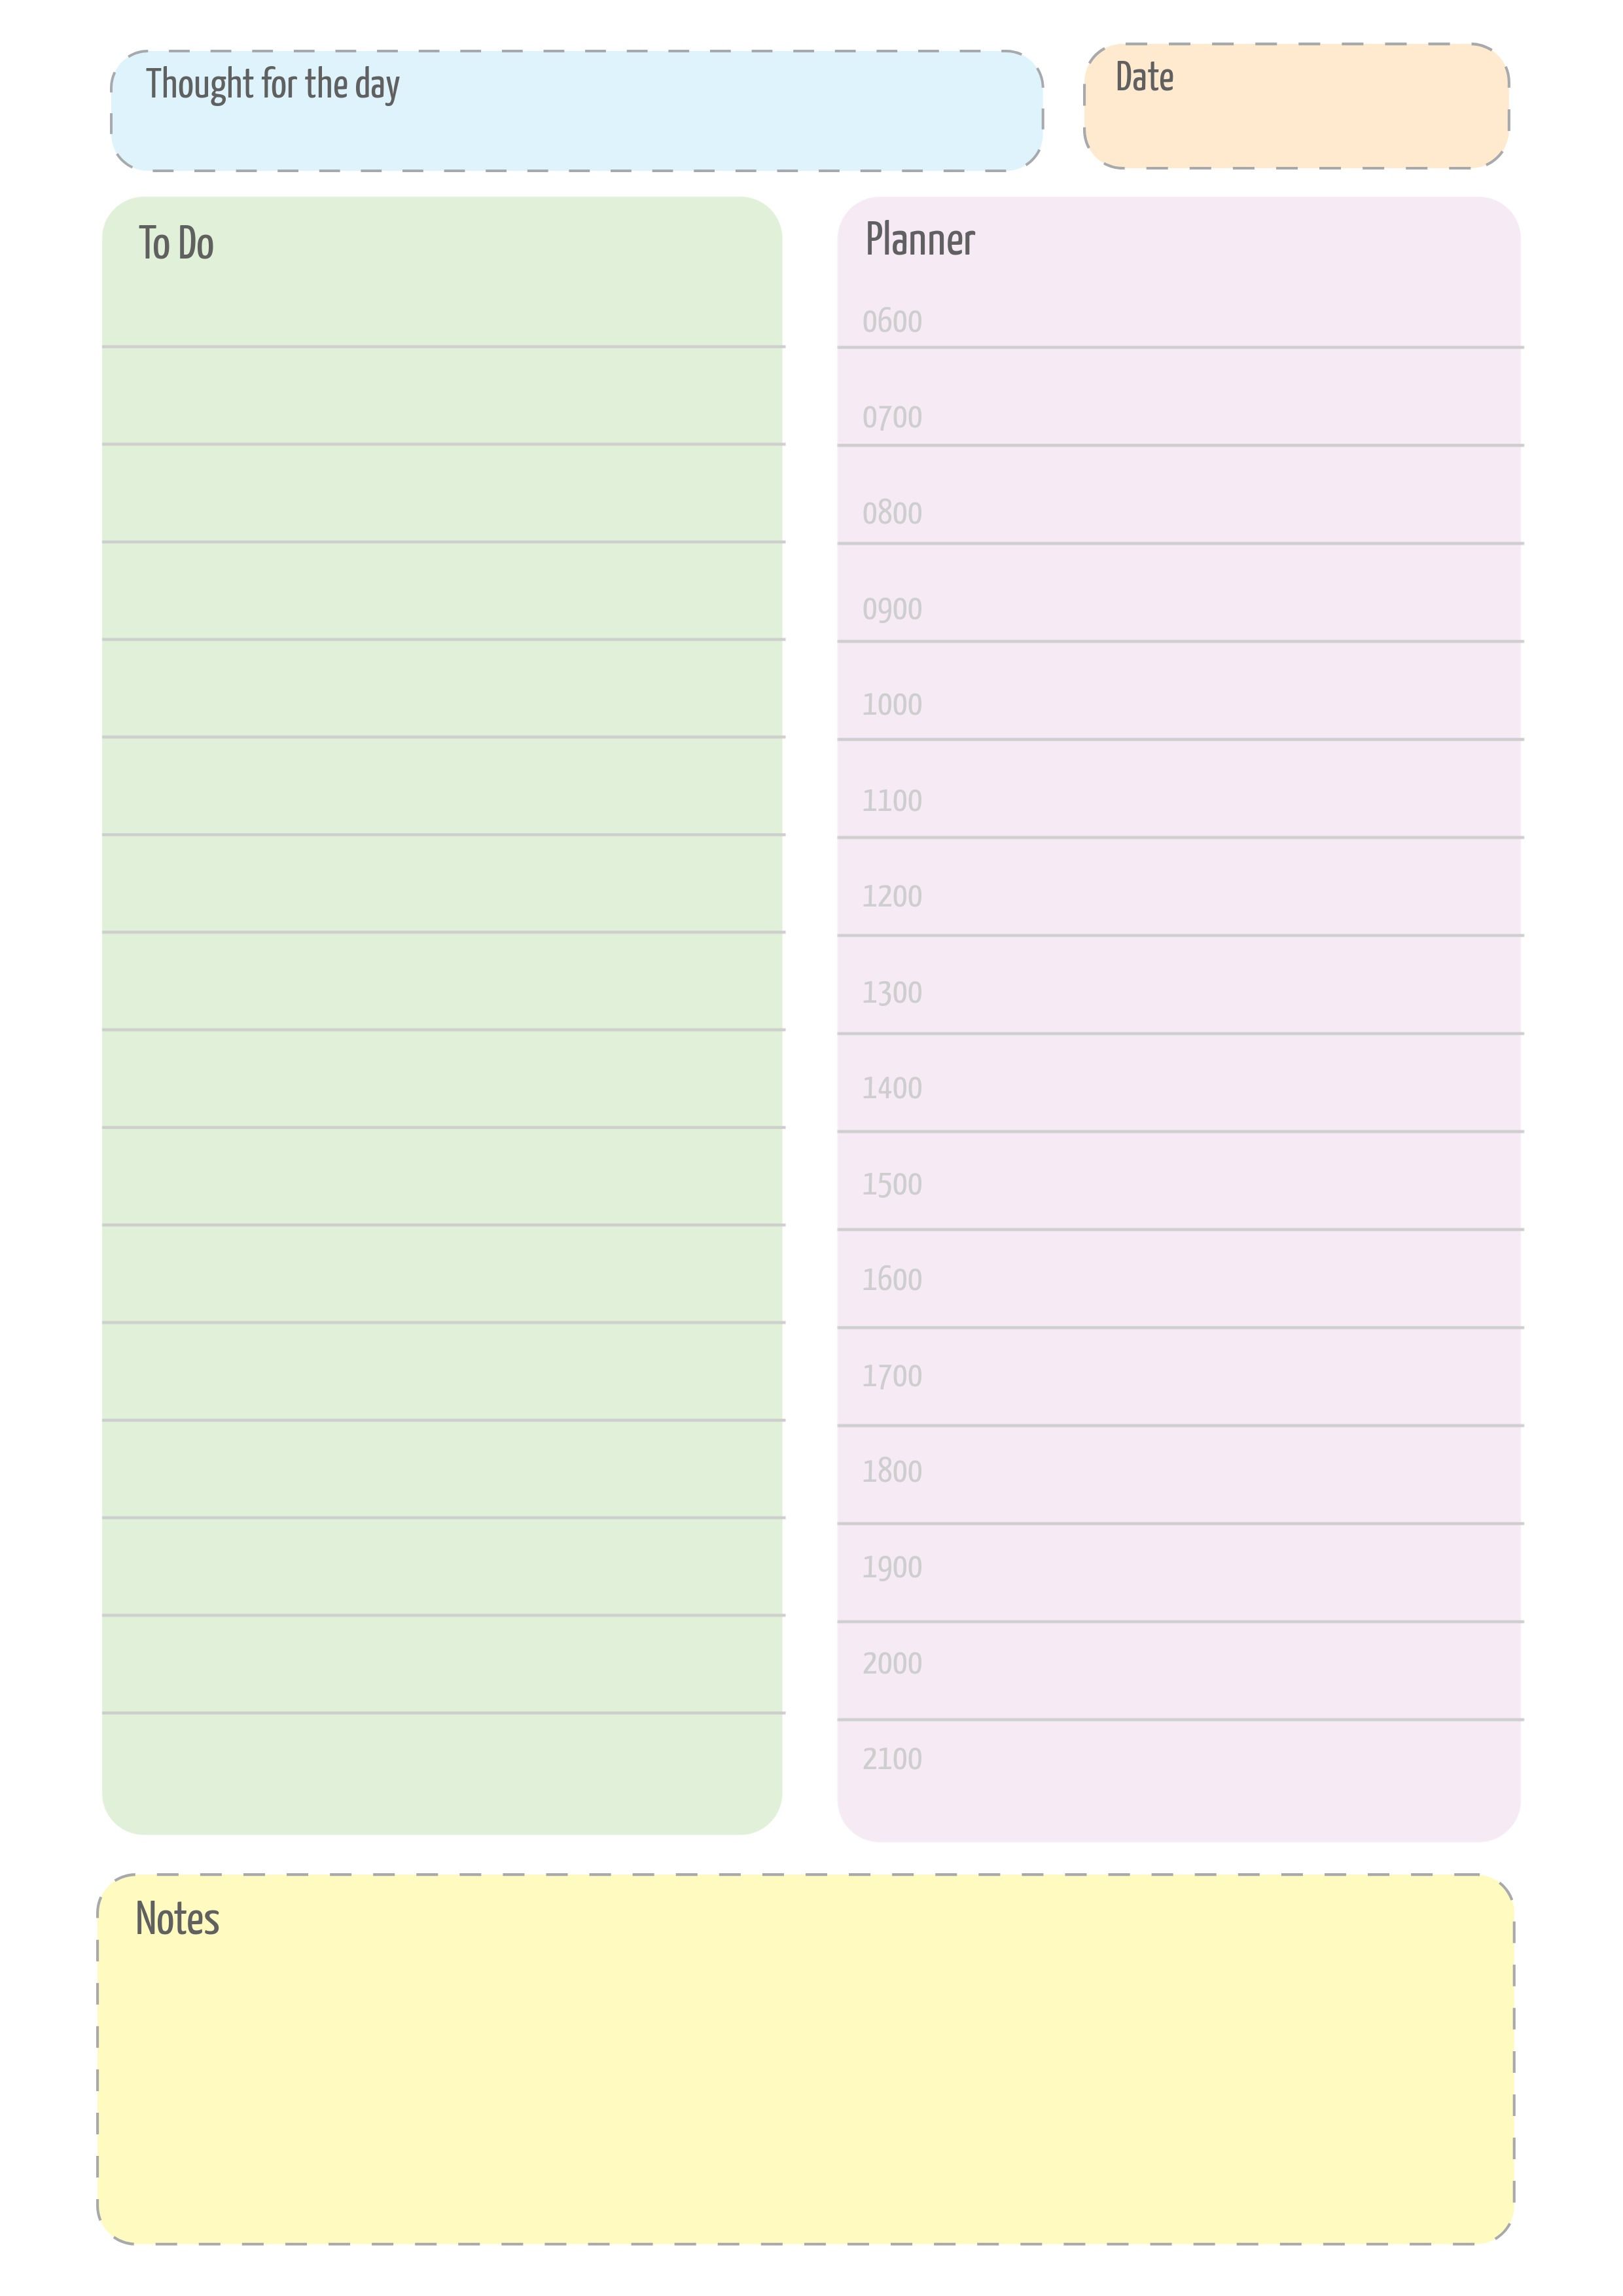 Colorful daily planner template - 16 simple ideas to kickstart your creativity - Image